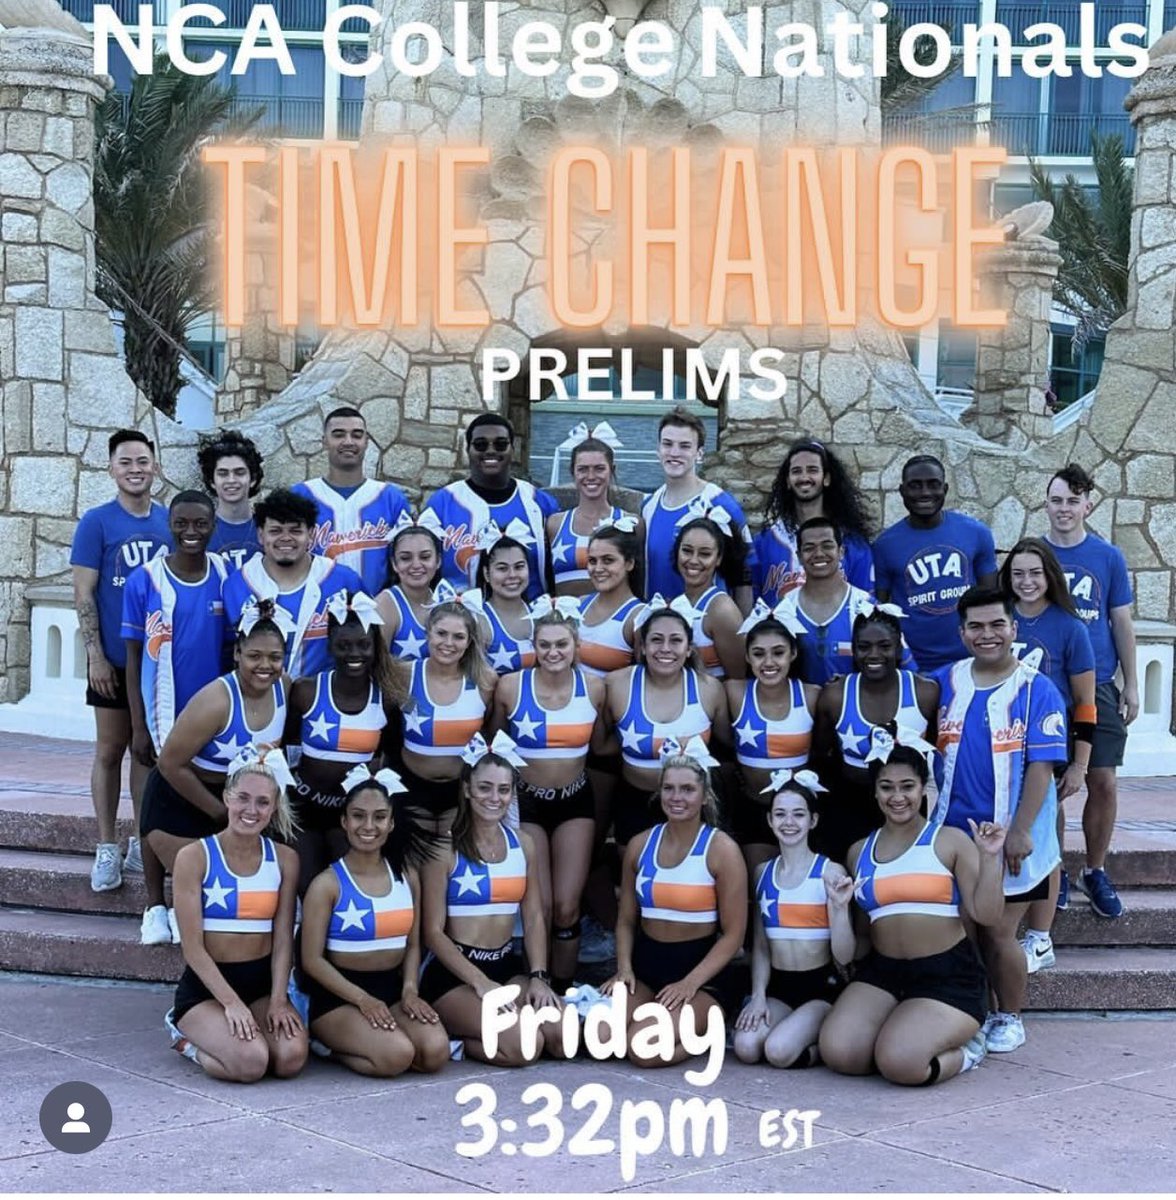 Little rain yesterday led to a time change, but it’s nothing but blue skies and sunshine today!!!! #theworkisworthit 🧡💙🧡💙